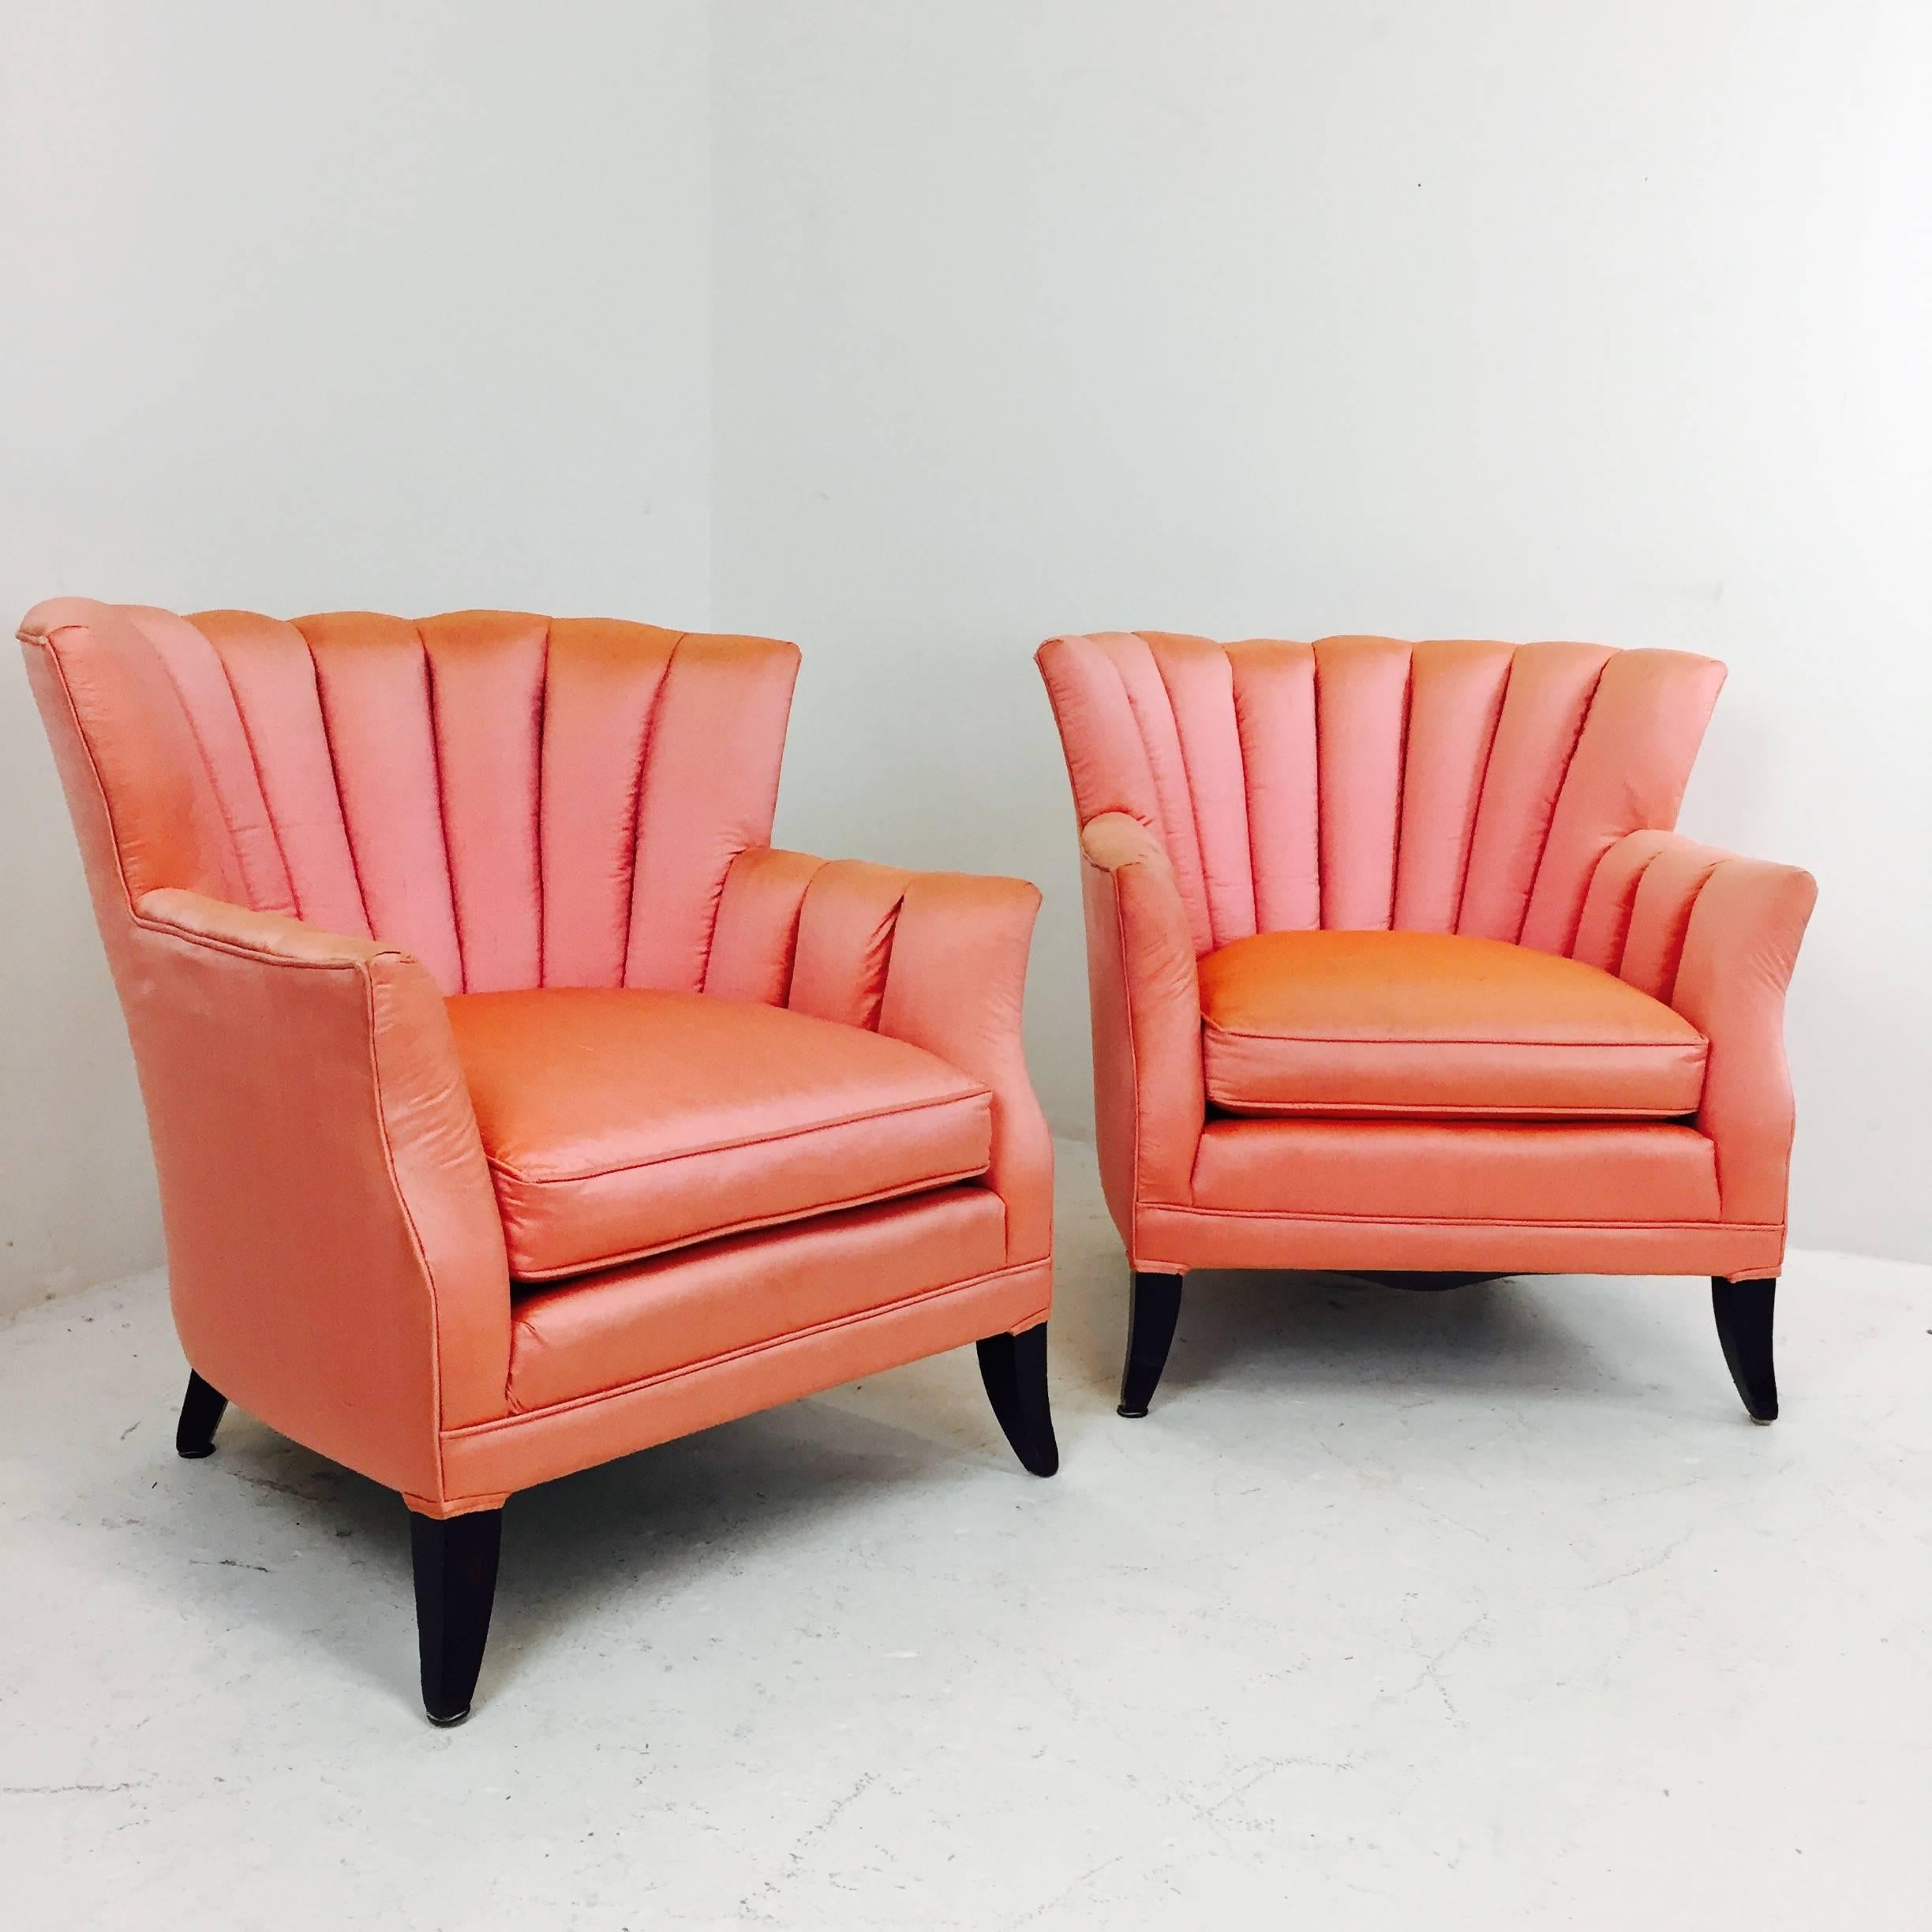 Pair of coral silk channel back Regency armchairs. In good vintage condition but new upholstery is recommended, circa 1960s.

Dimensions: 34" W x 33" D x 32" T,
seat height 18".